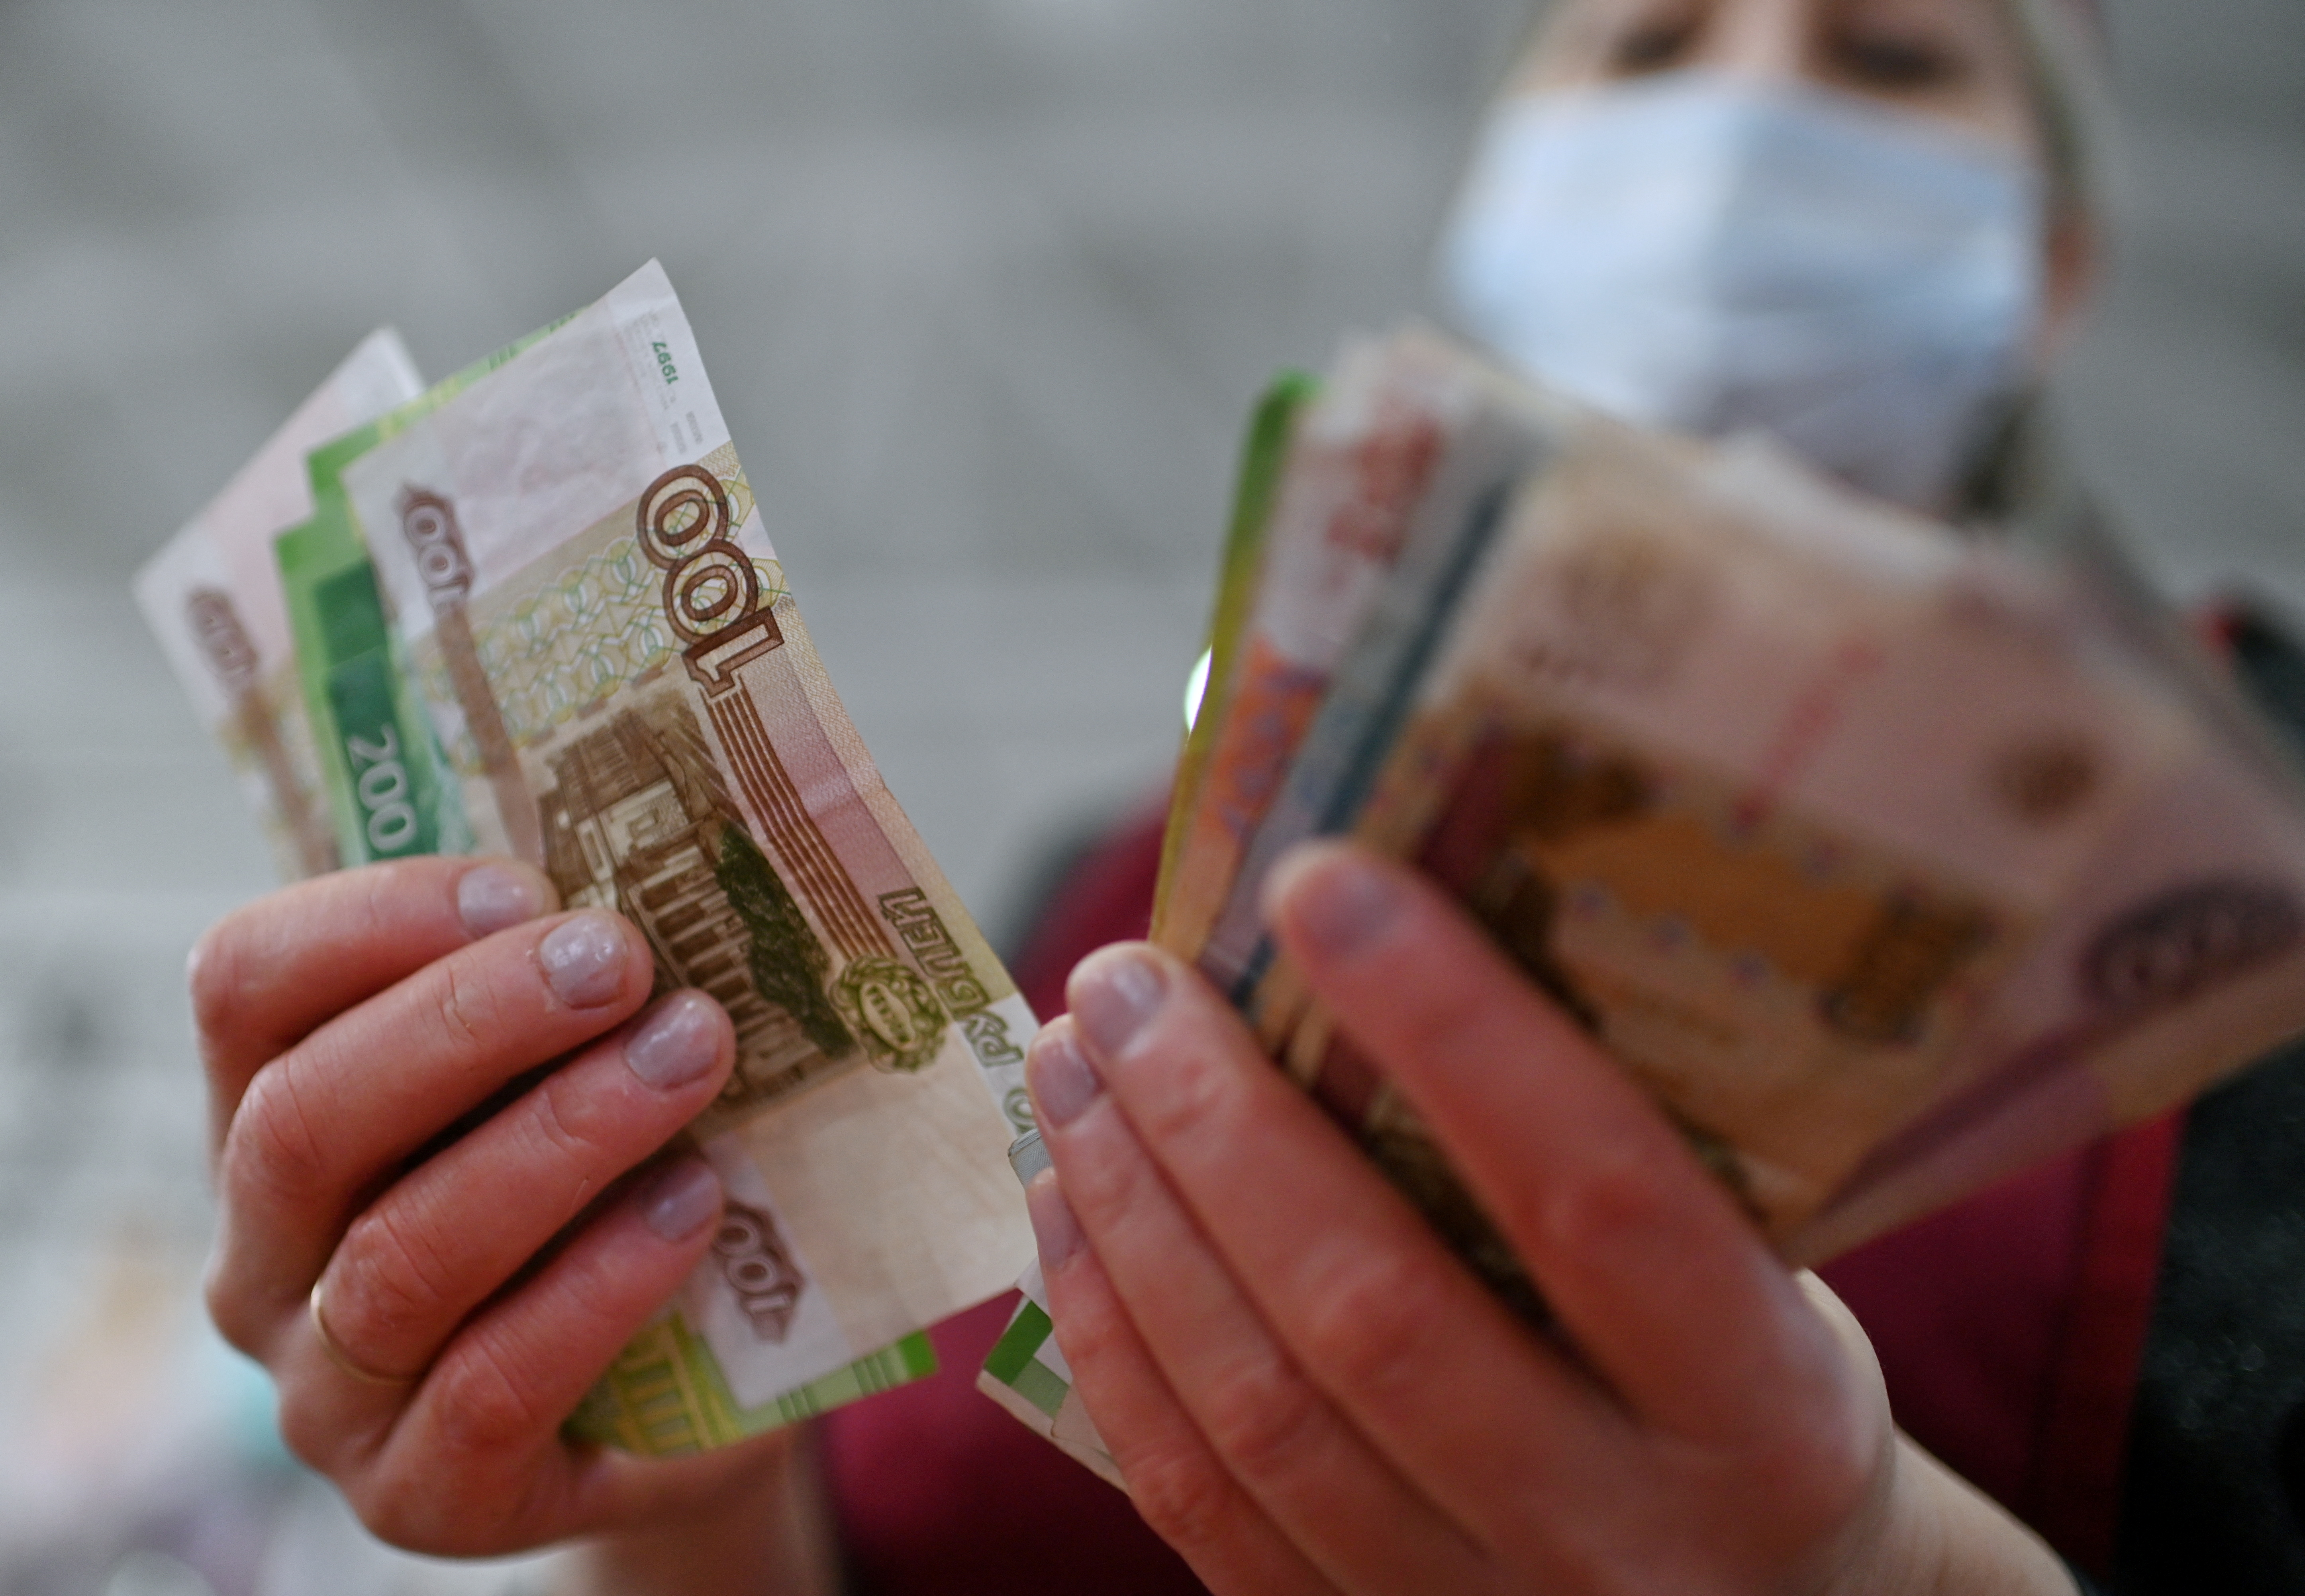 A vendor counts Russian rouble banknotes at a market in Omsk